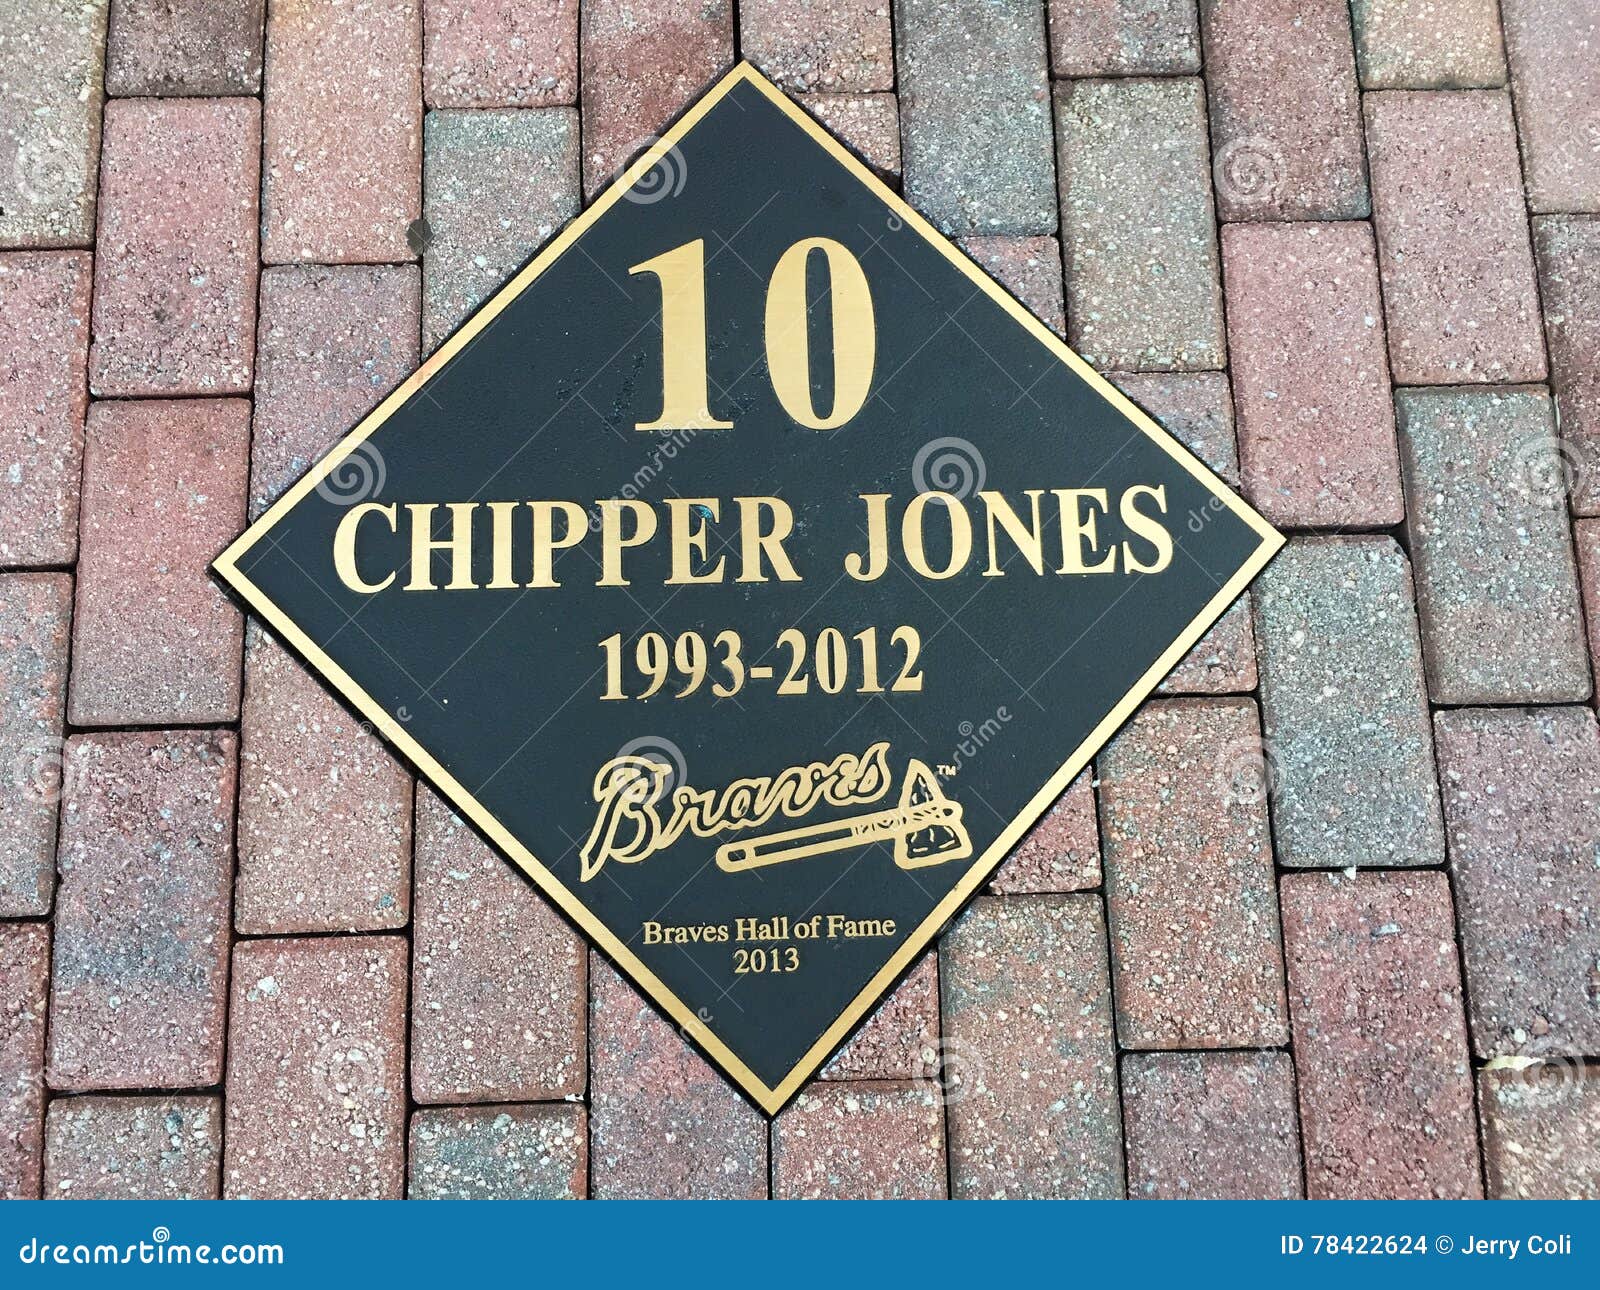 Chipper Jones Hall of Fame Plaque Editorial Stock Image - Image of